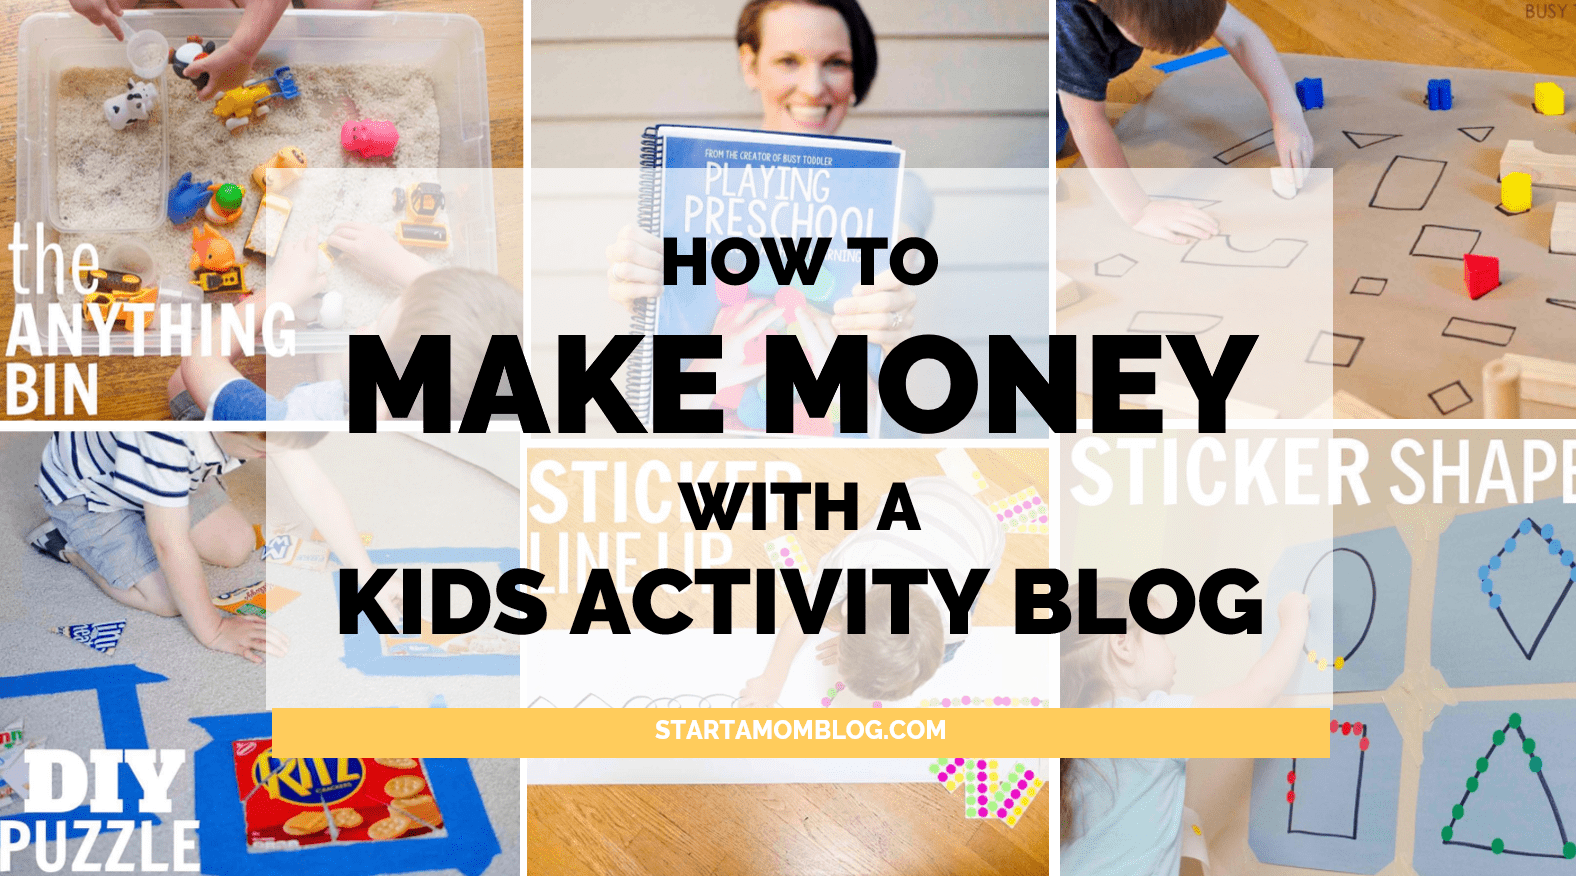 How To Start And Make Money With A Kids Activity Blog Start A Mom Blog - 